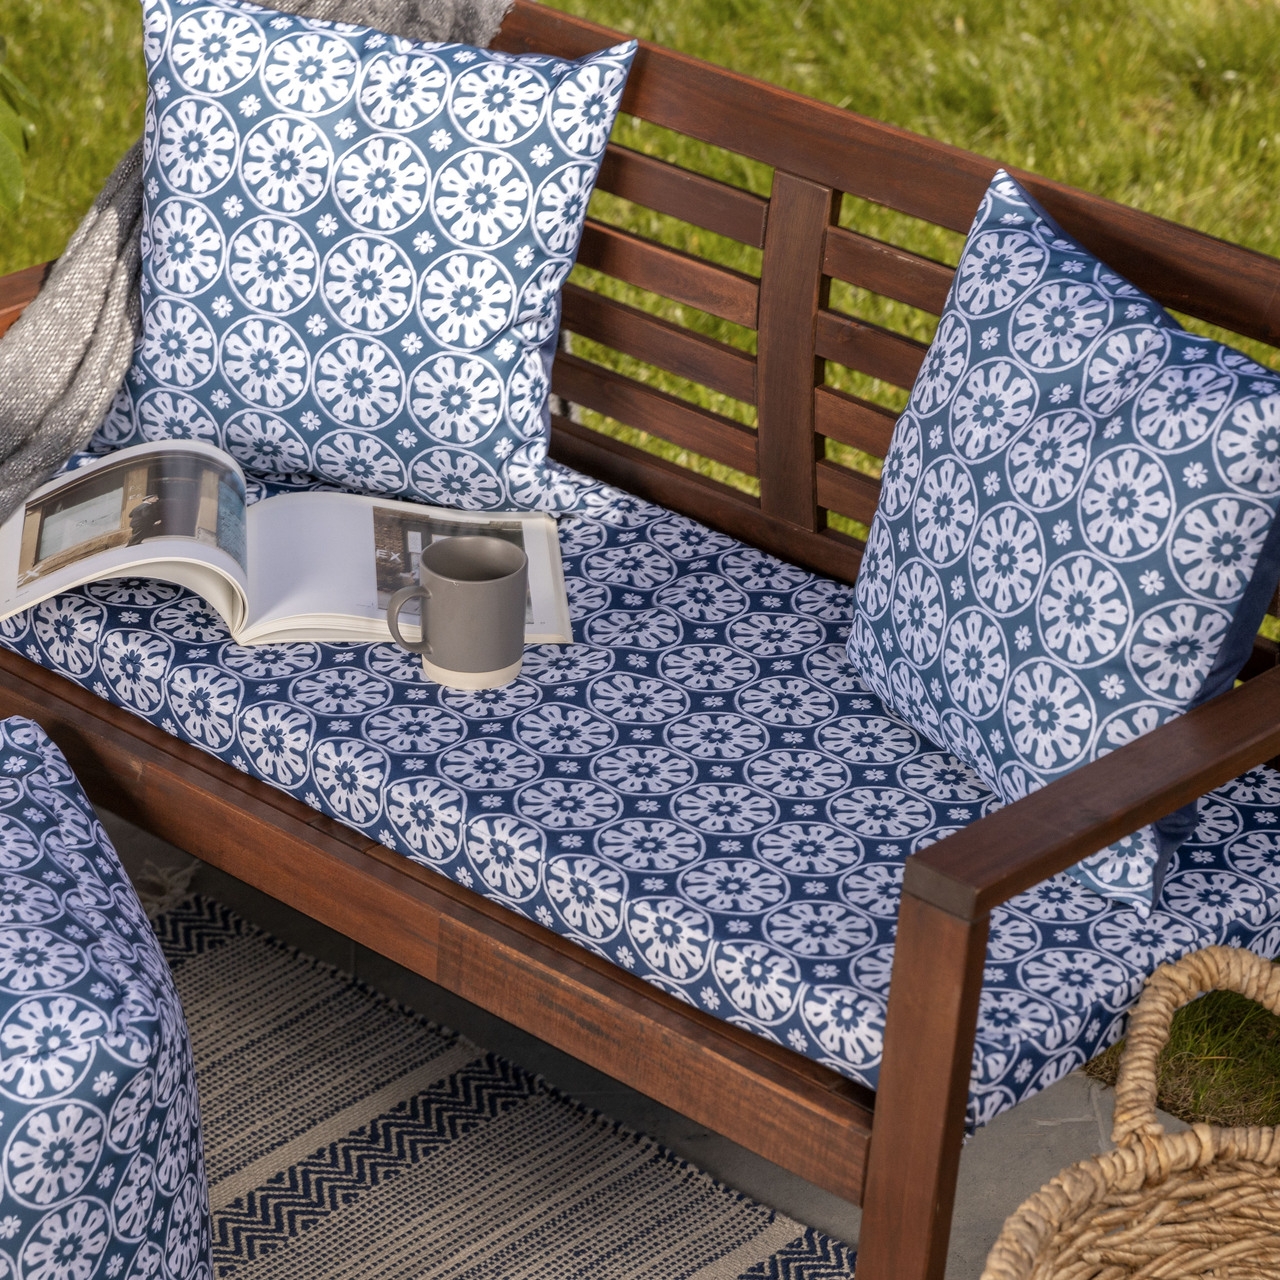 Celina Digby Luxury Water Resistant Garden Outdoor Bench Seat Pad – Casablanca Navy (Available in 2-Seater or 3-Seater Size) (144cm x 54cm 6cm)